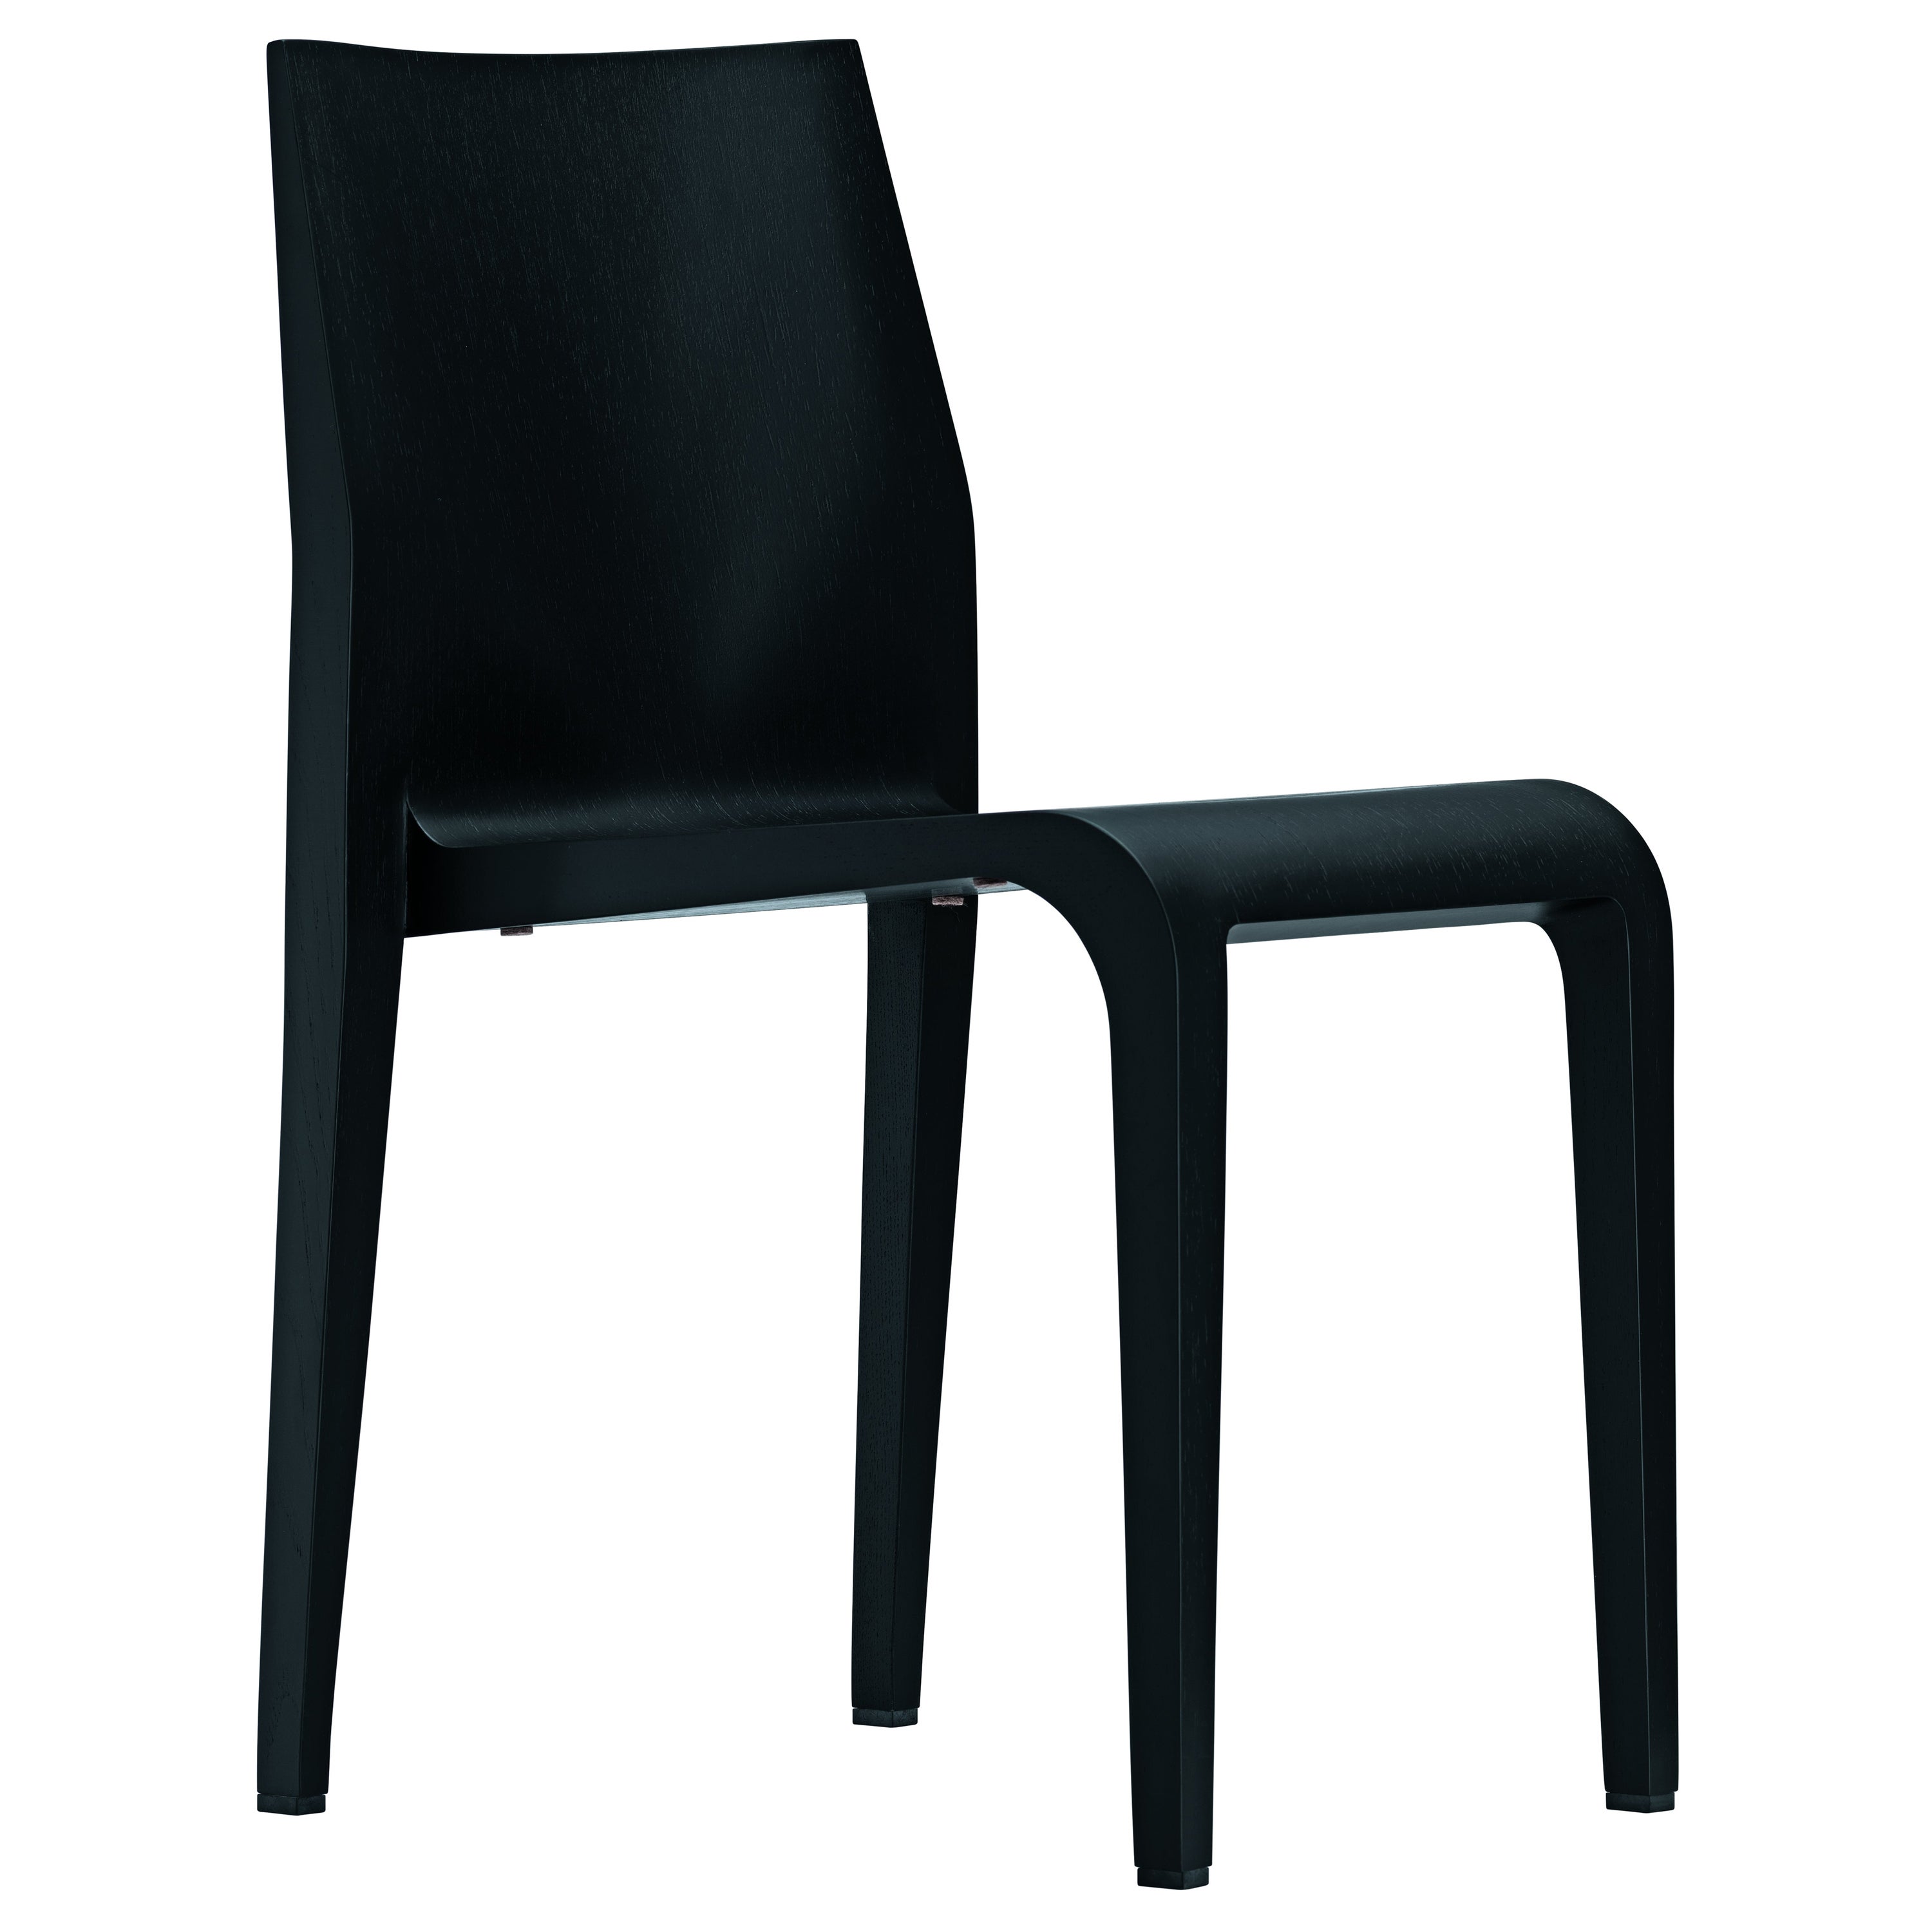 Alias 301 Laleggera Chair in Black Color Stained Wood by Riccardo Blumer For Sale